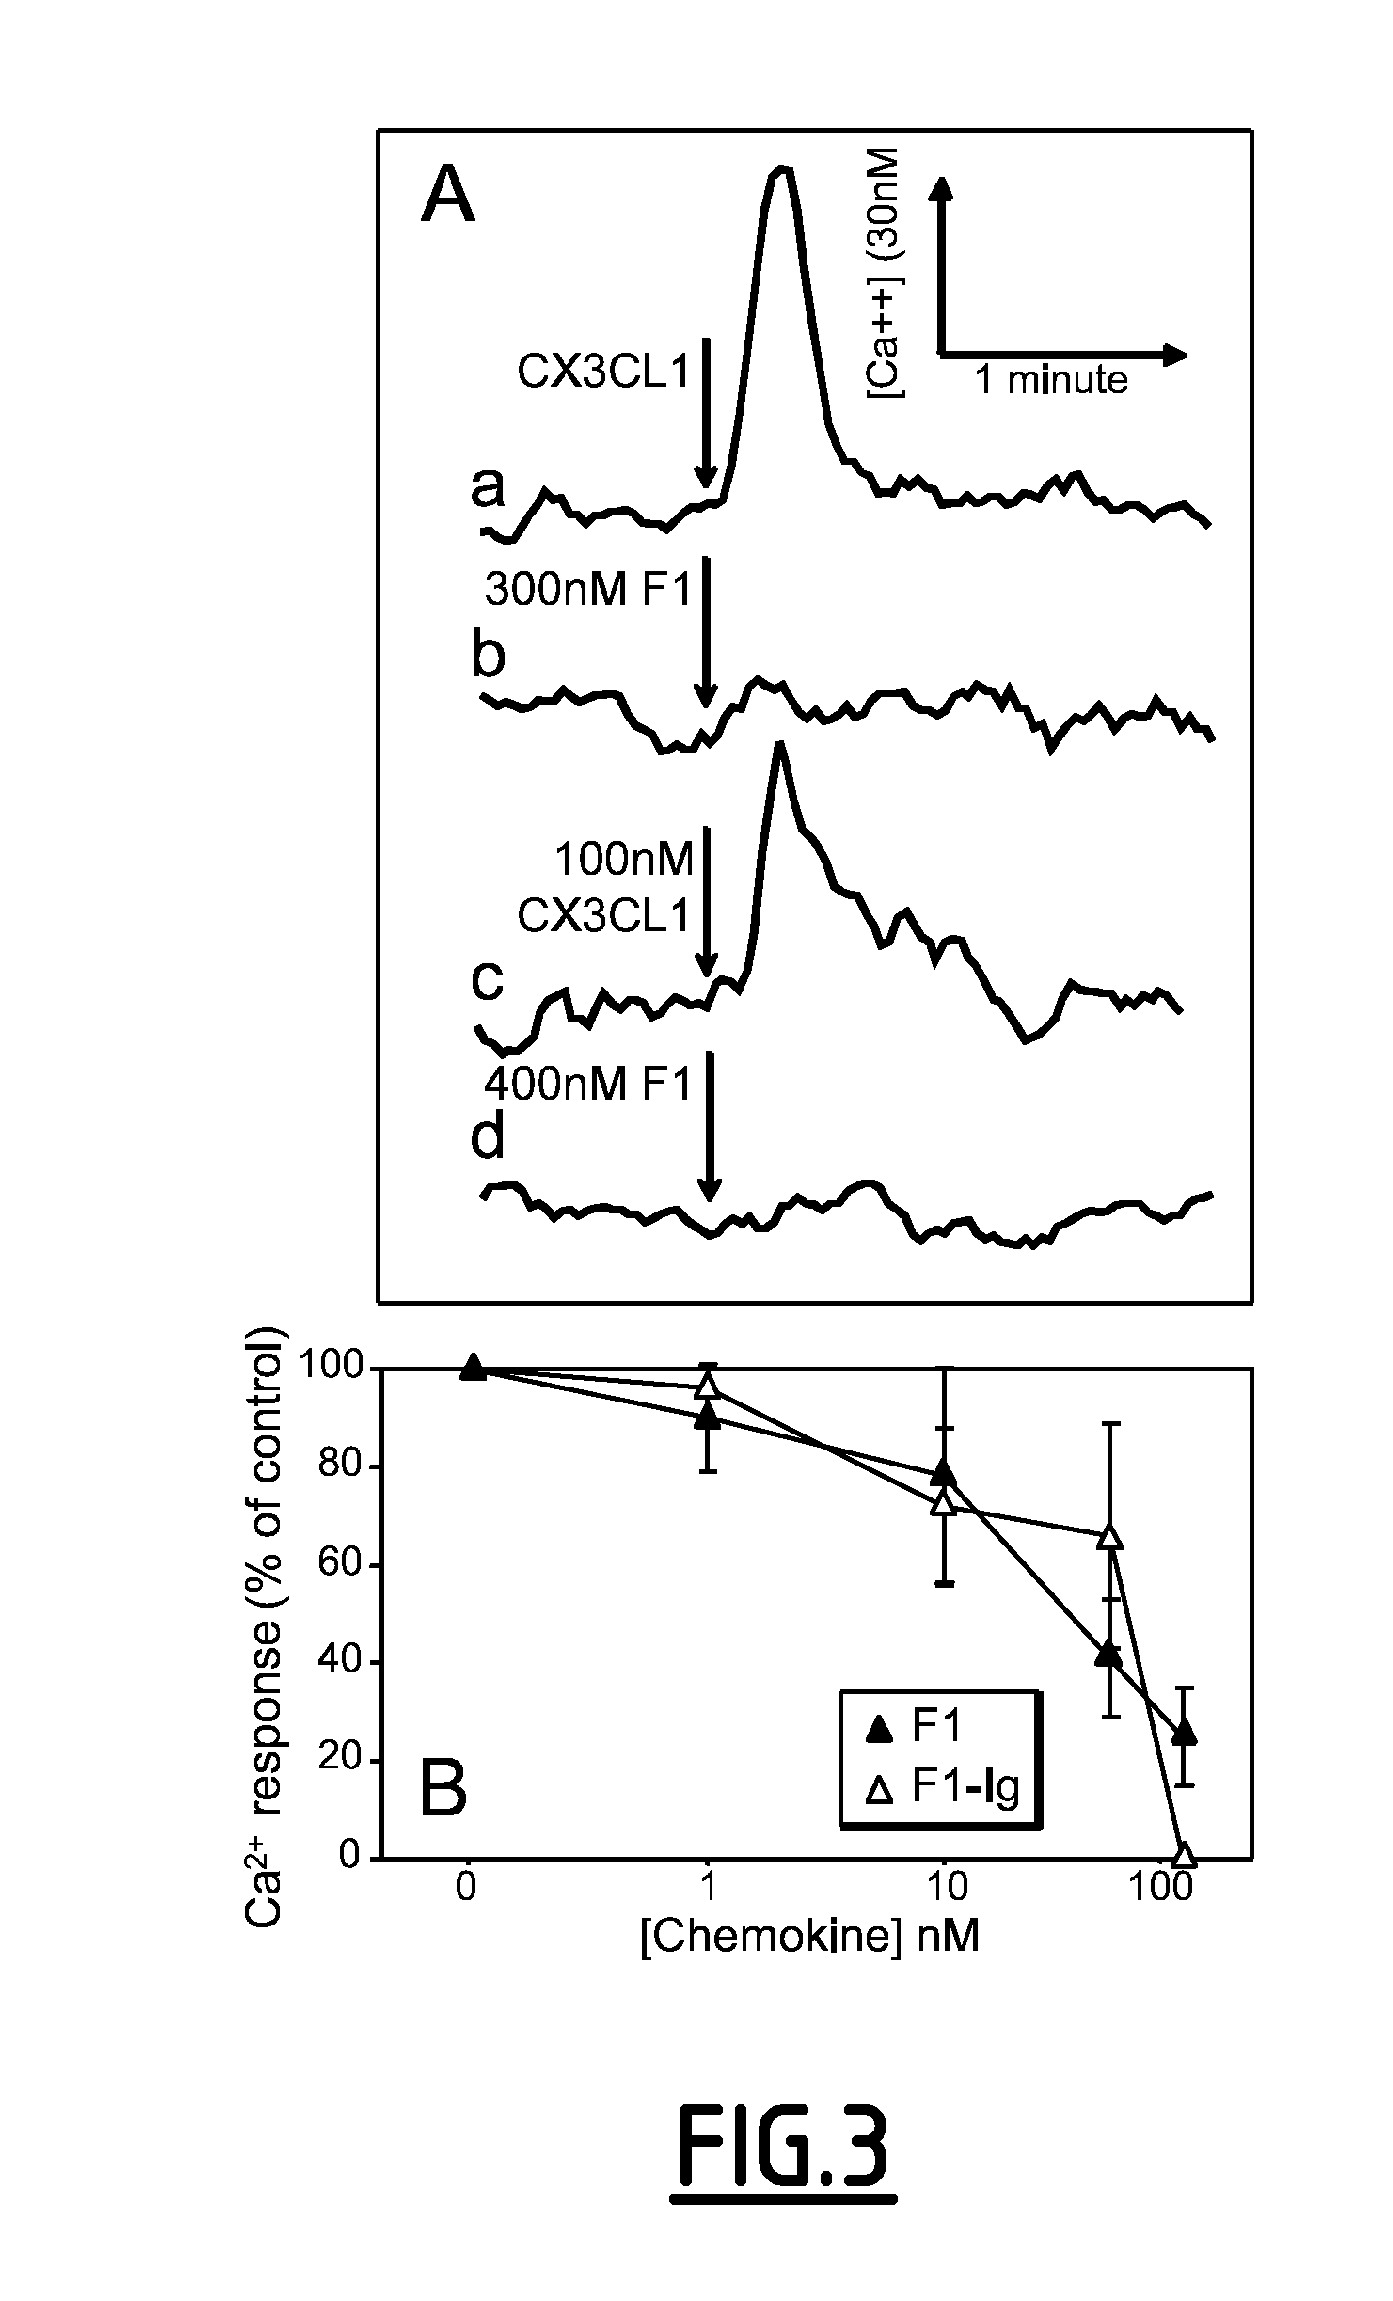 Modulators of the cx3cri receptor and therapeutic uses thereof